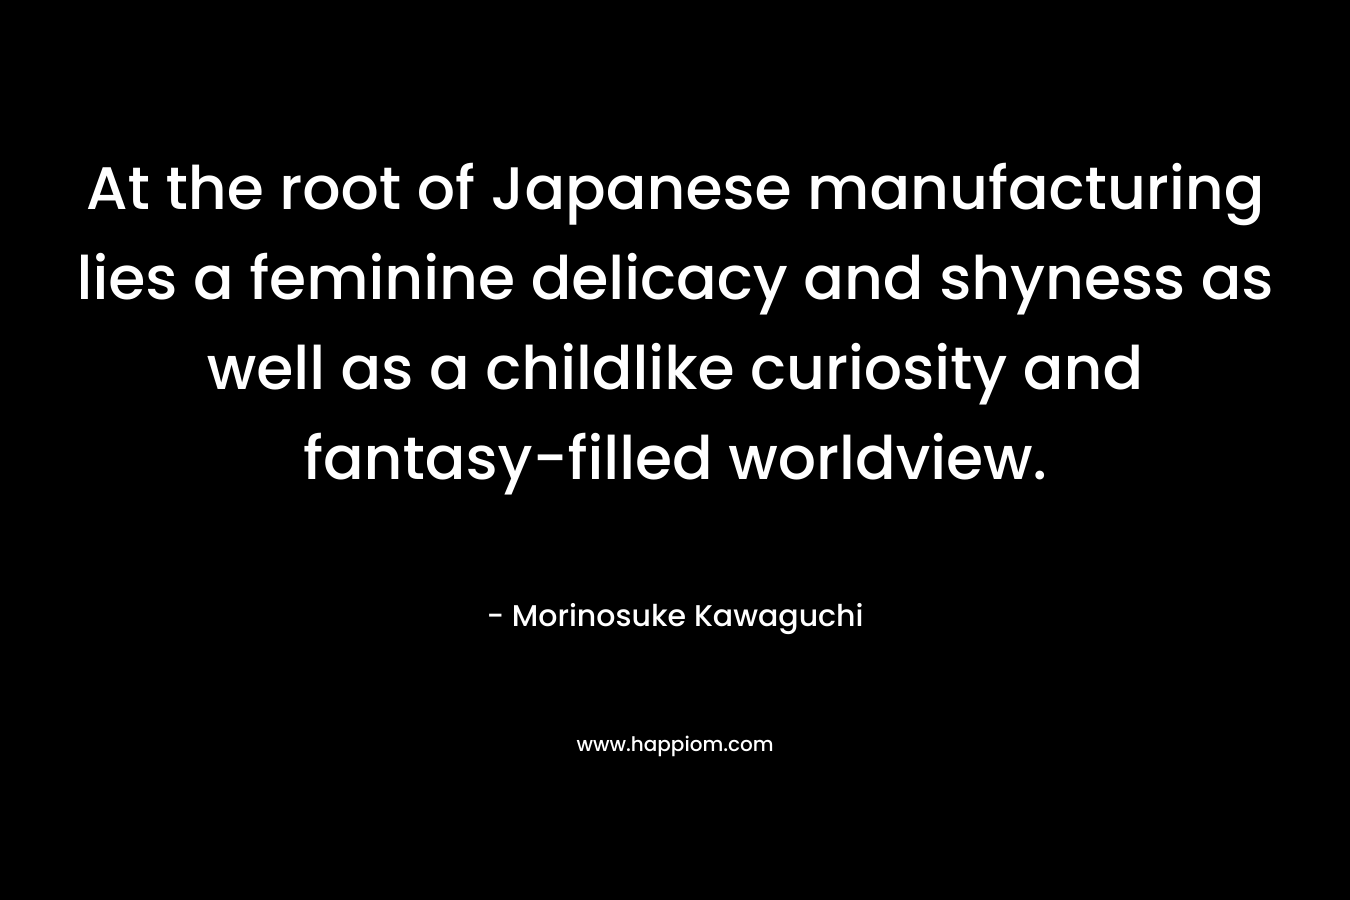 At the root of Japanese manufacturing lies a feminine delicacy and shyness as well as a childlike curiosity and fantasy-filled worldview. – Morinosuke Kawaguchi